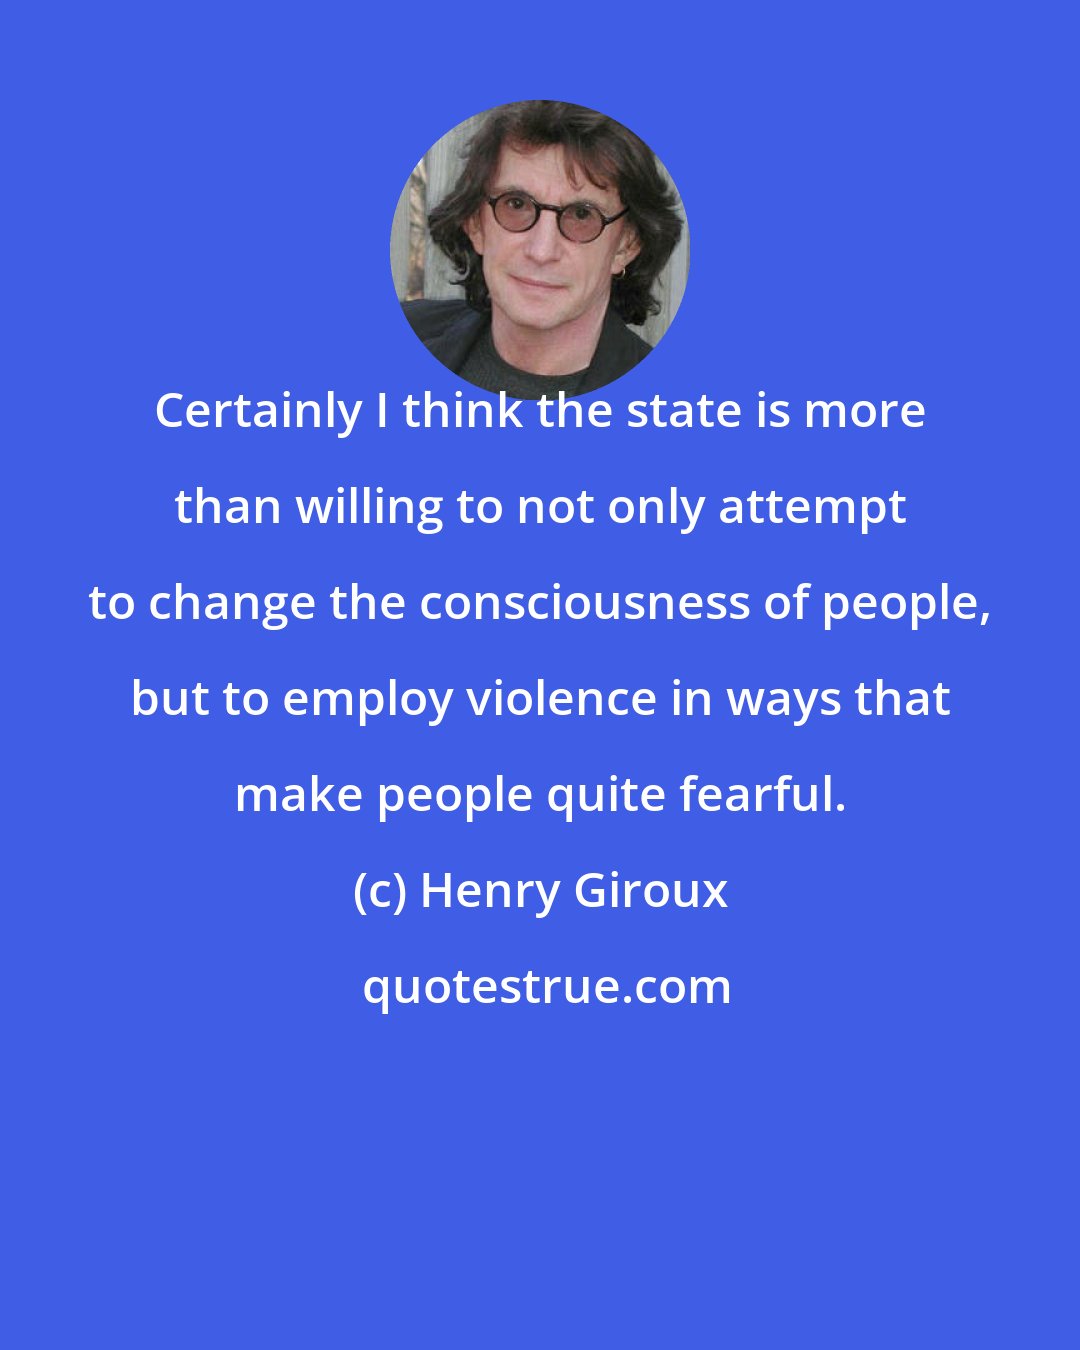 Henry Giroux: Certainly I think the state is more than willing to not only attempt to change the consciousness of people, but to employ violence in ways that make people quite fearful.